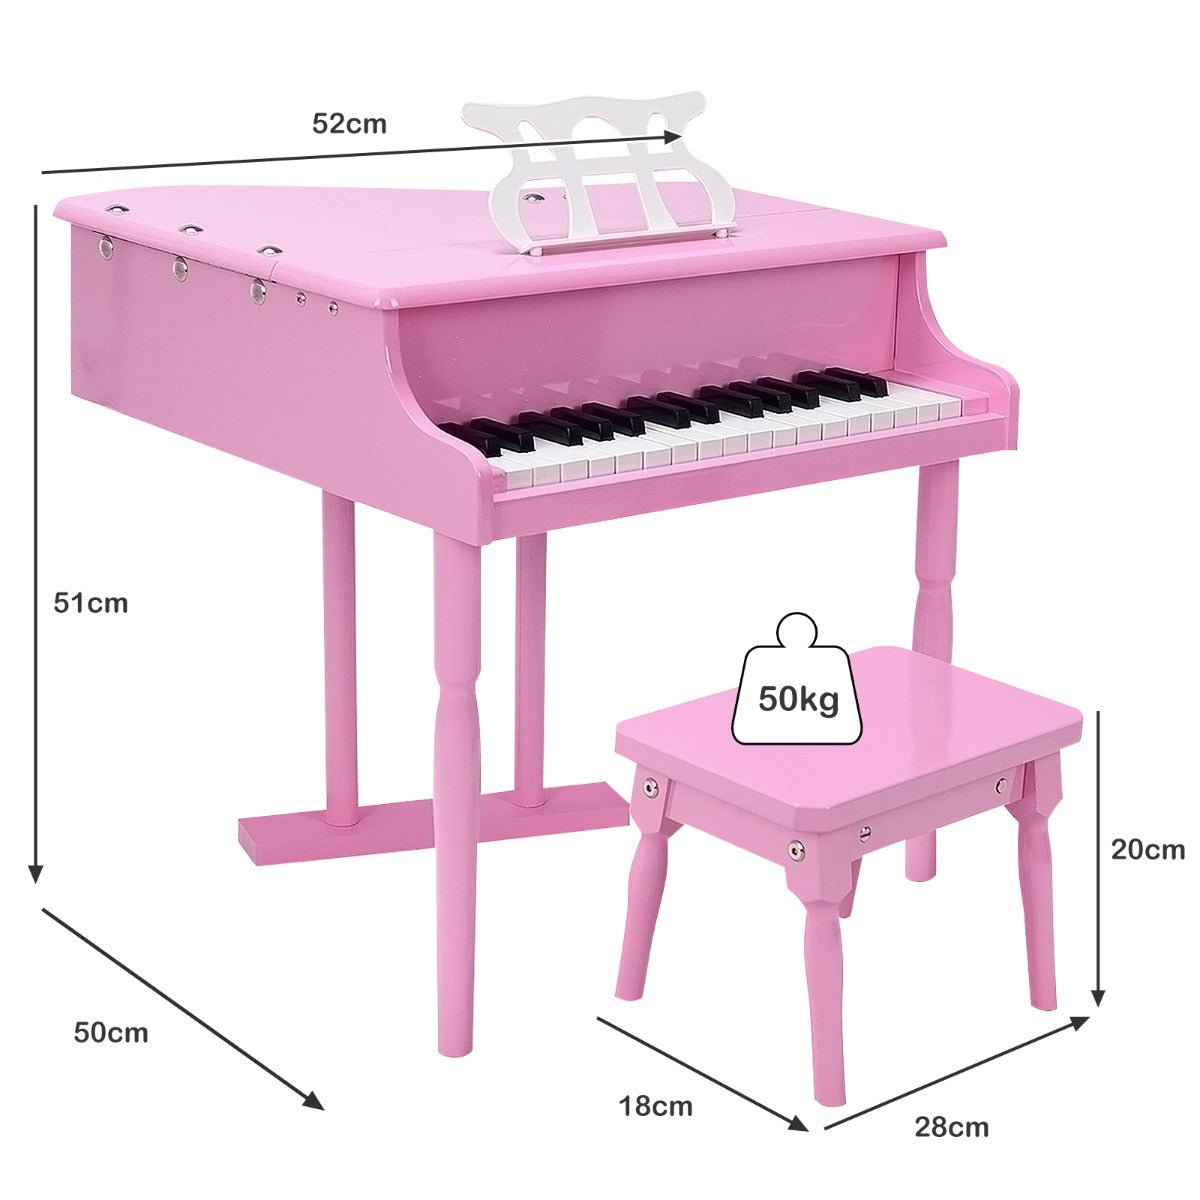 Get the Pink Piano Keyboard Toy for Budding Musicians